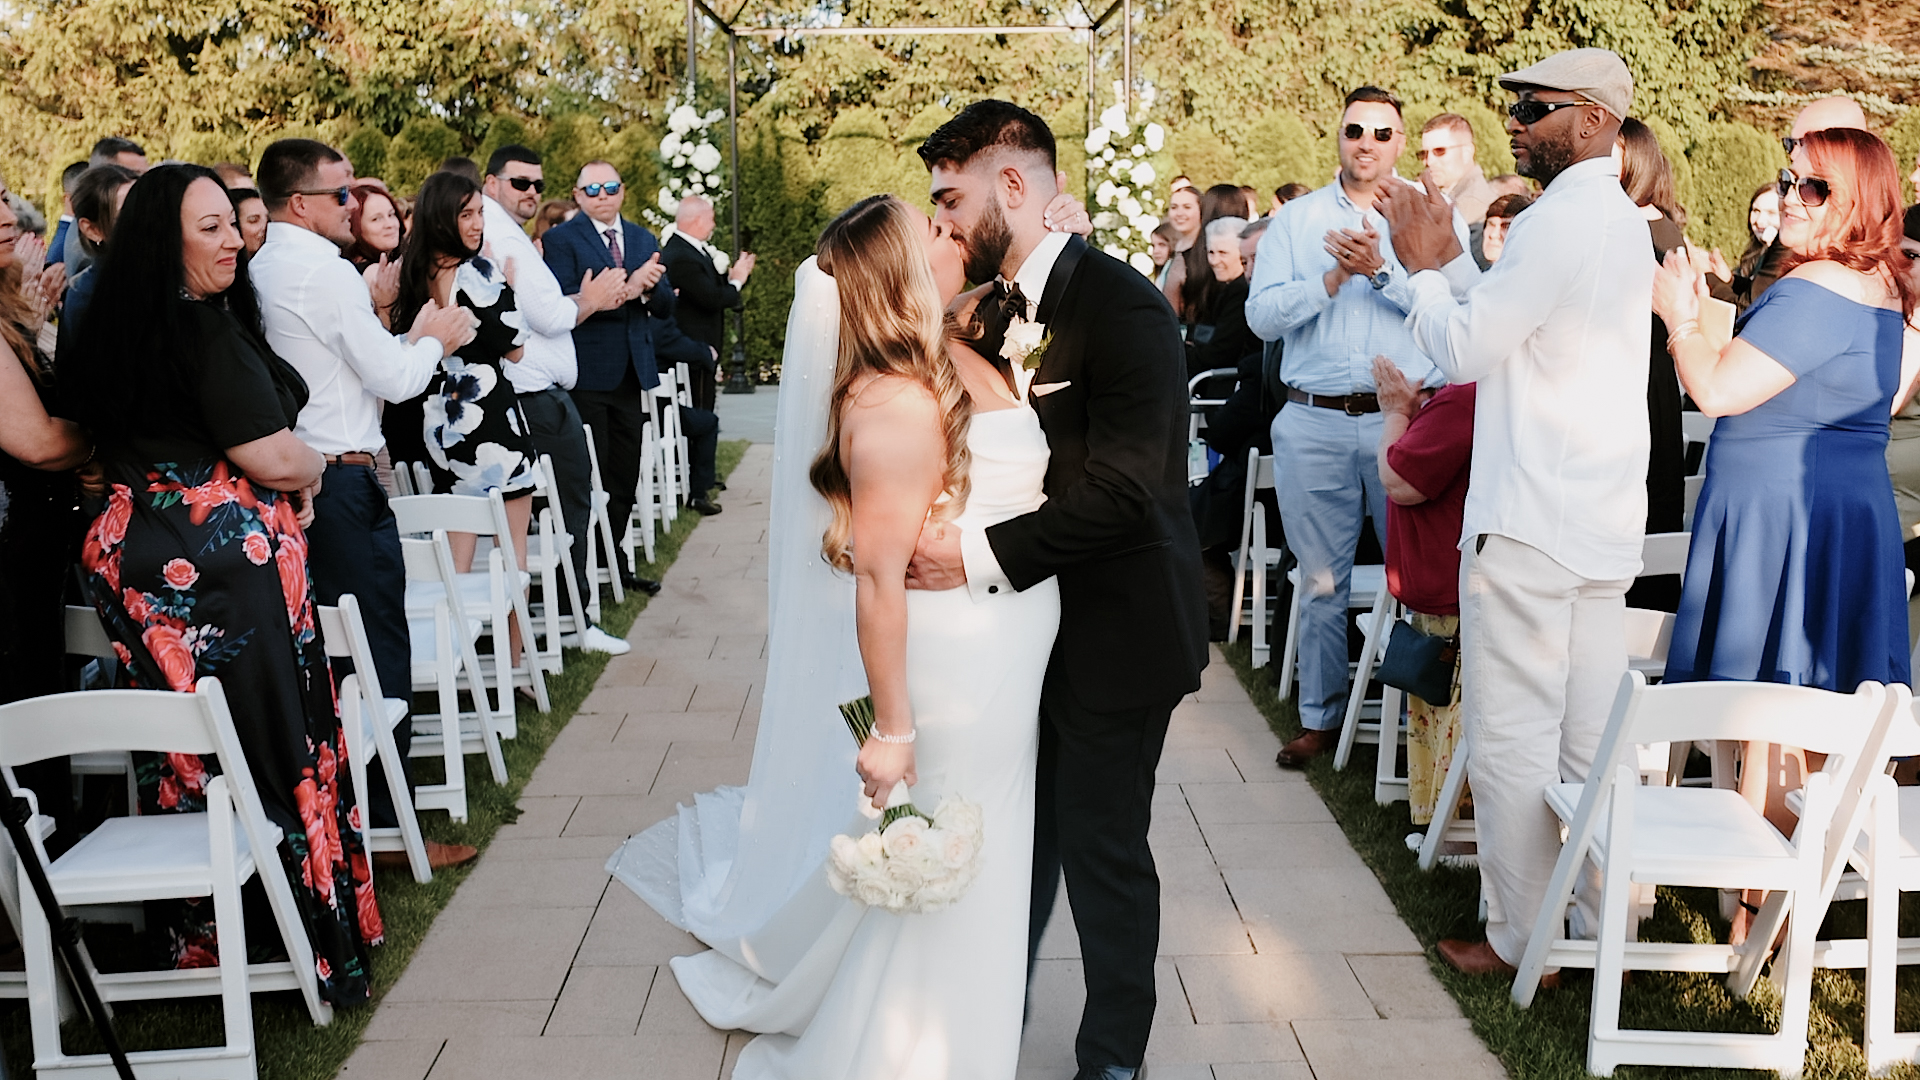 Bride and groom standing at the end of the aisle kissing. There are people standing clapping on either side of the aisle. Bride is in an elegant white dress with a long veil and her bouquet in her hand at her side. Groom is in a black tuxedo